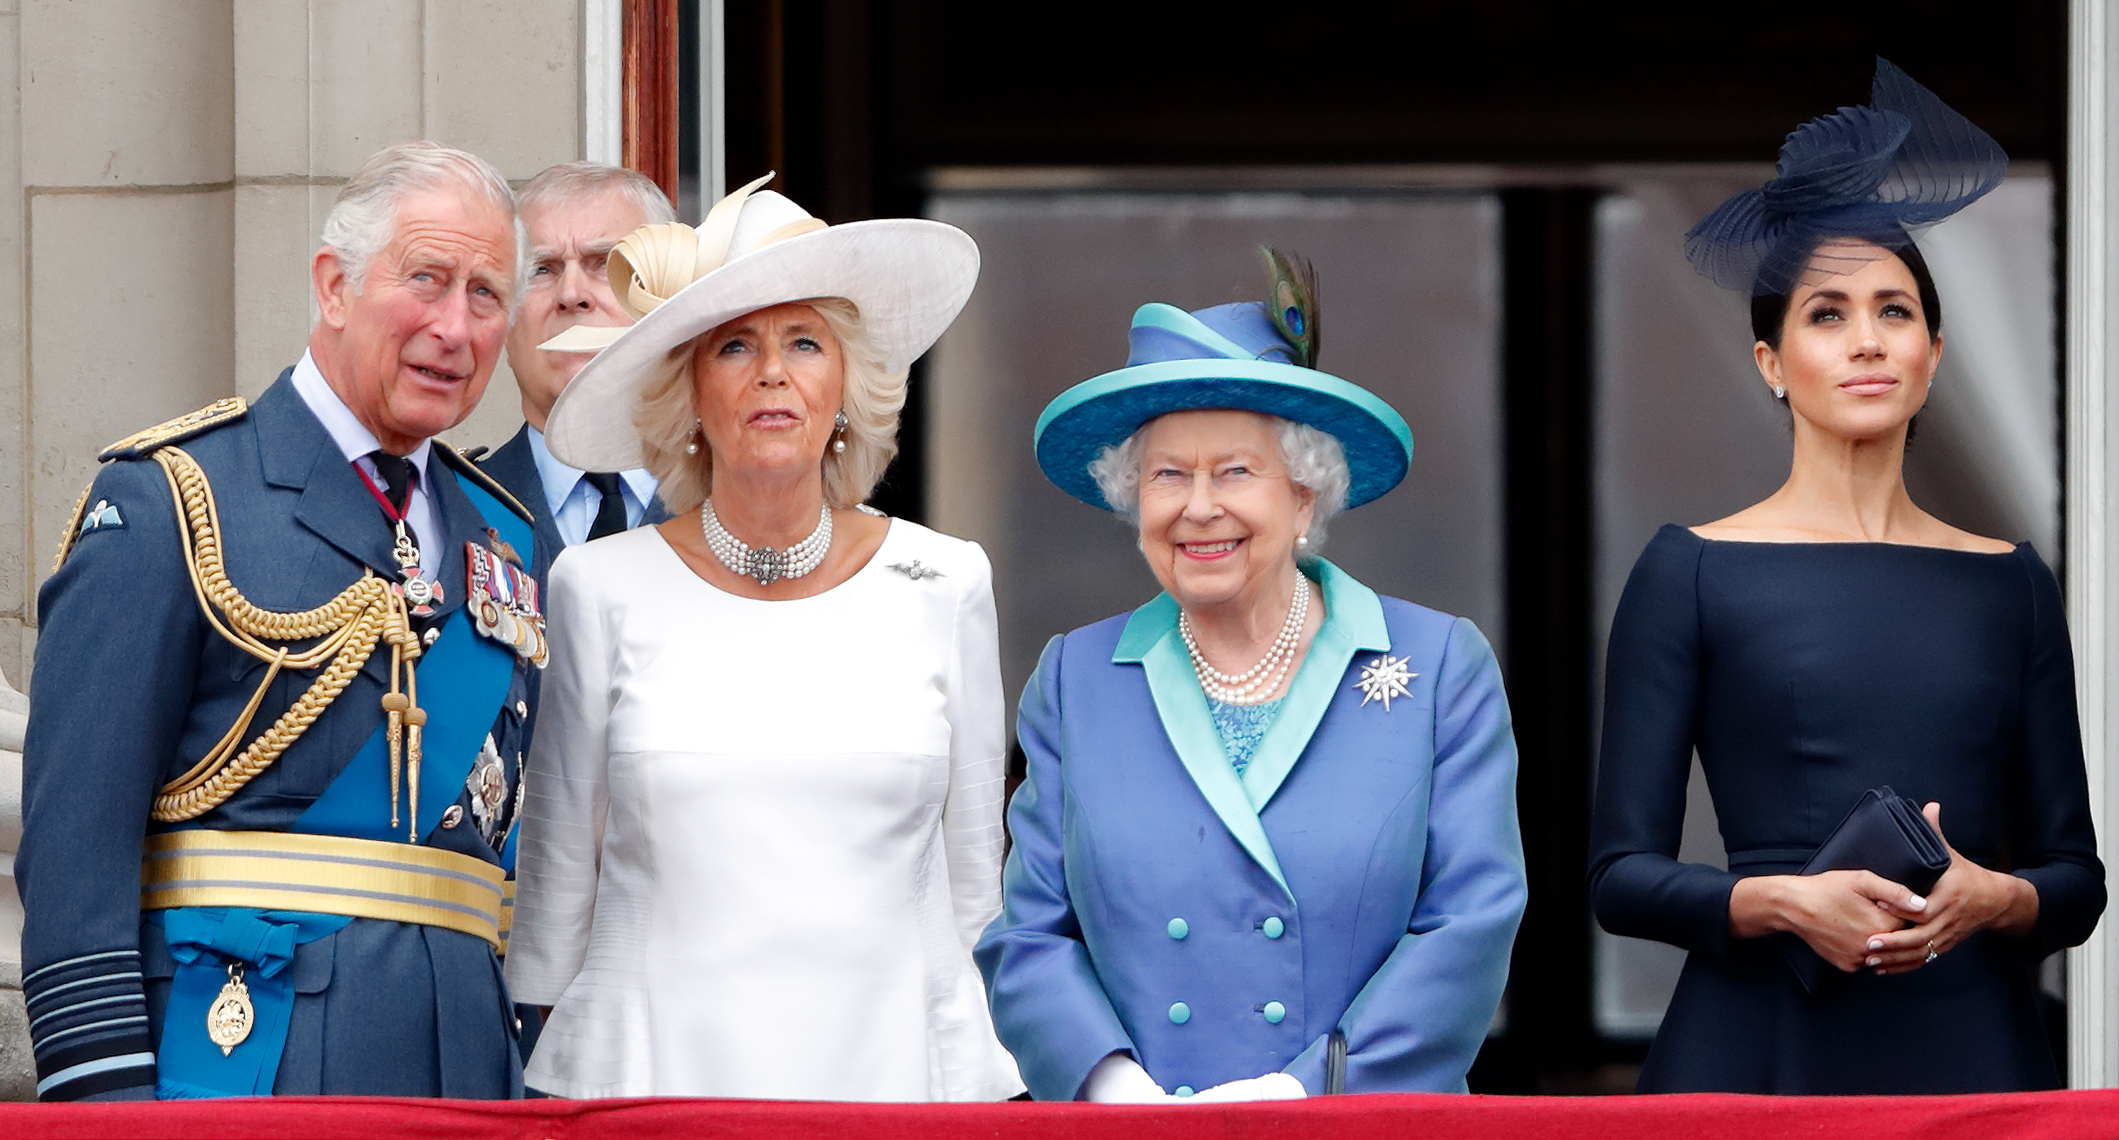 Camilla Parker Bowles and Meghan Markle's Feud Revealed